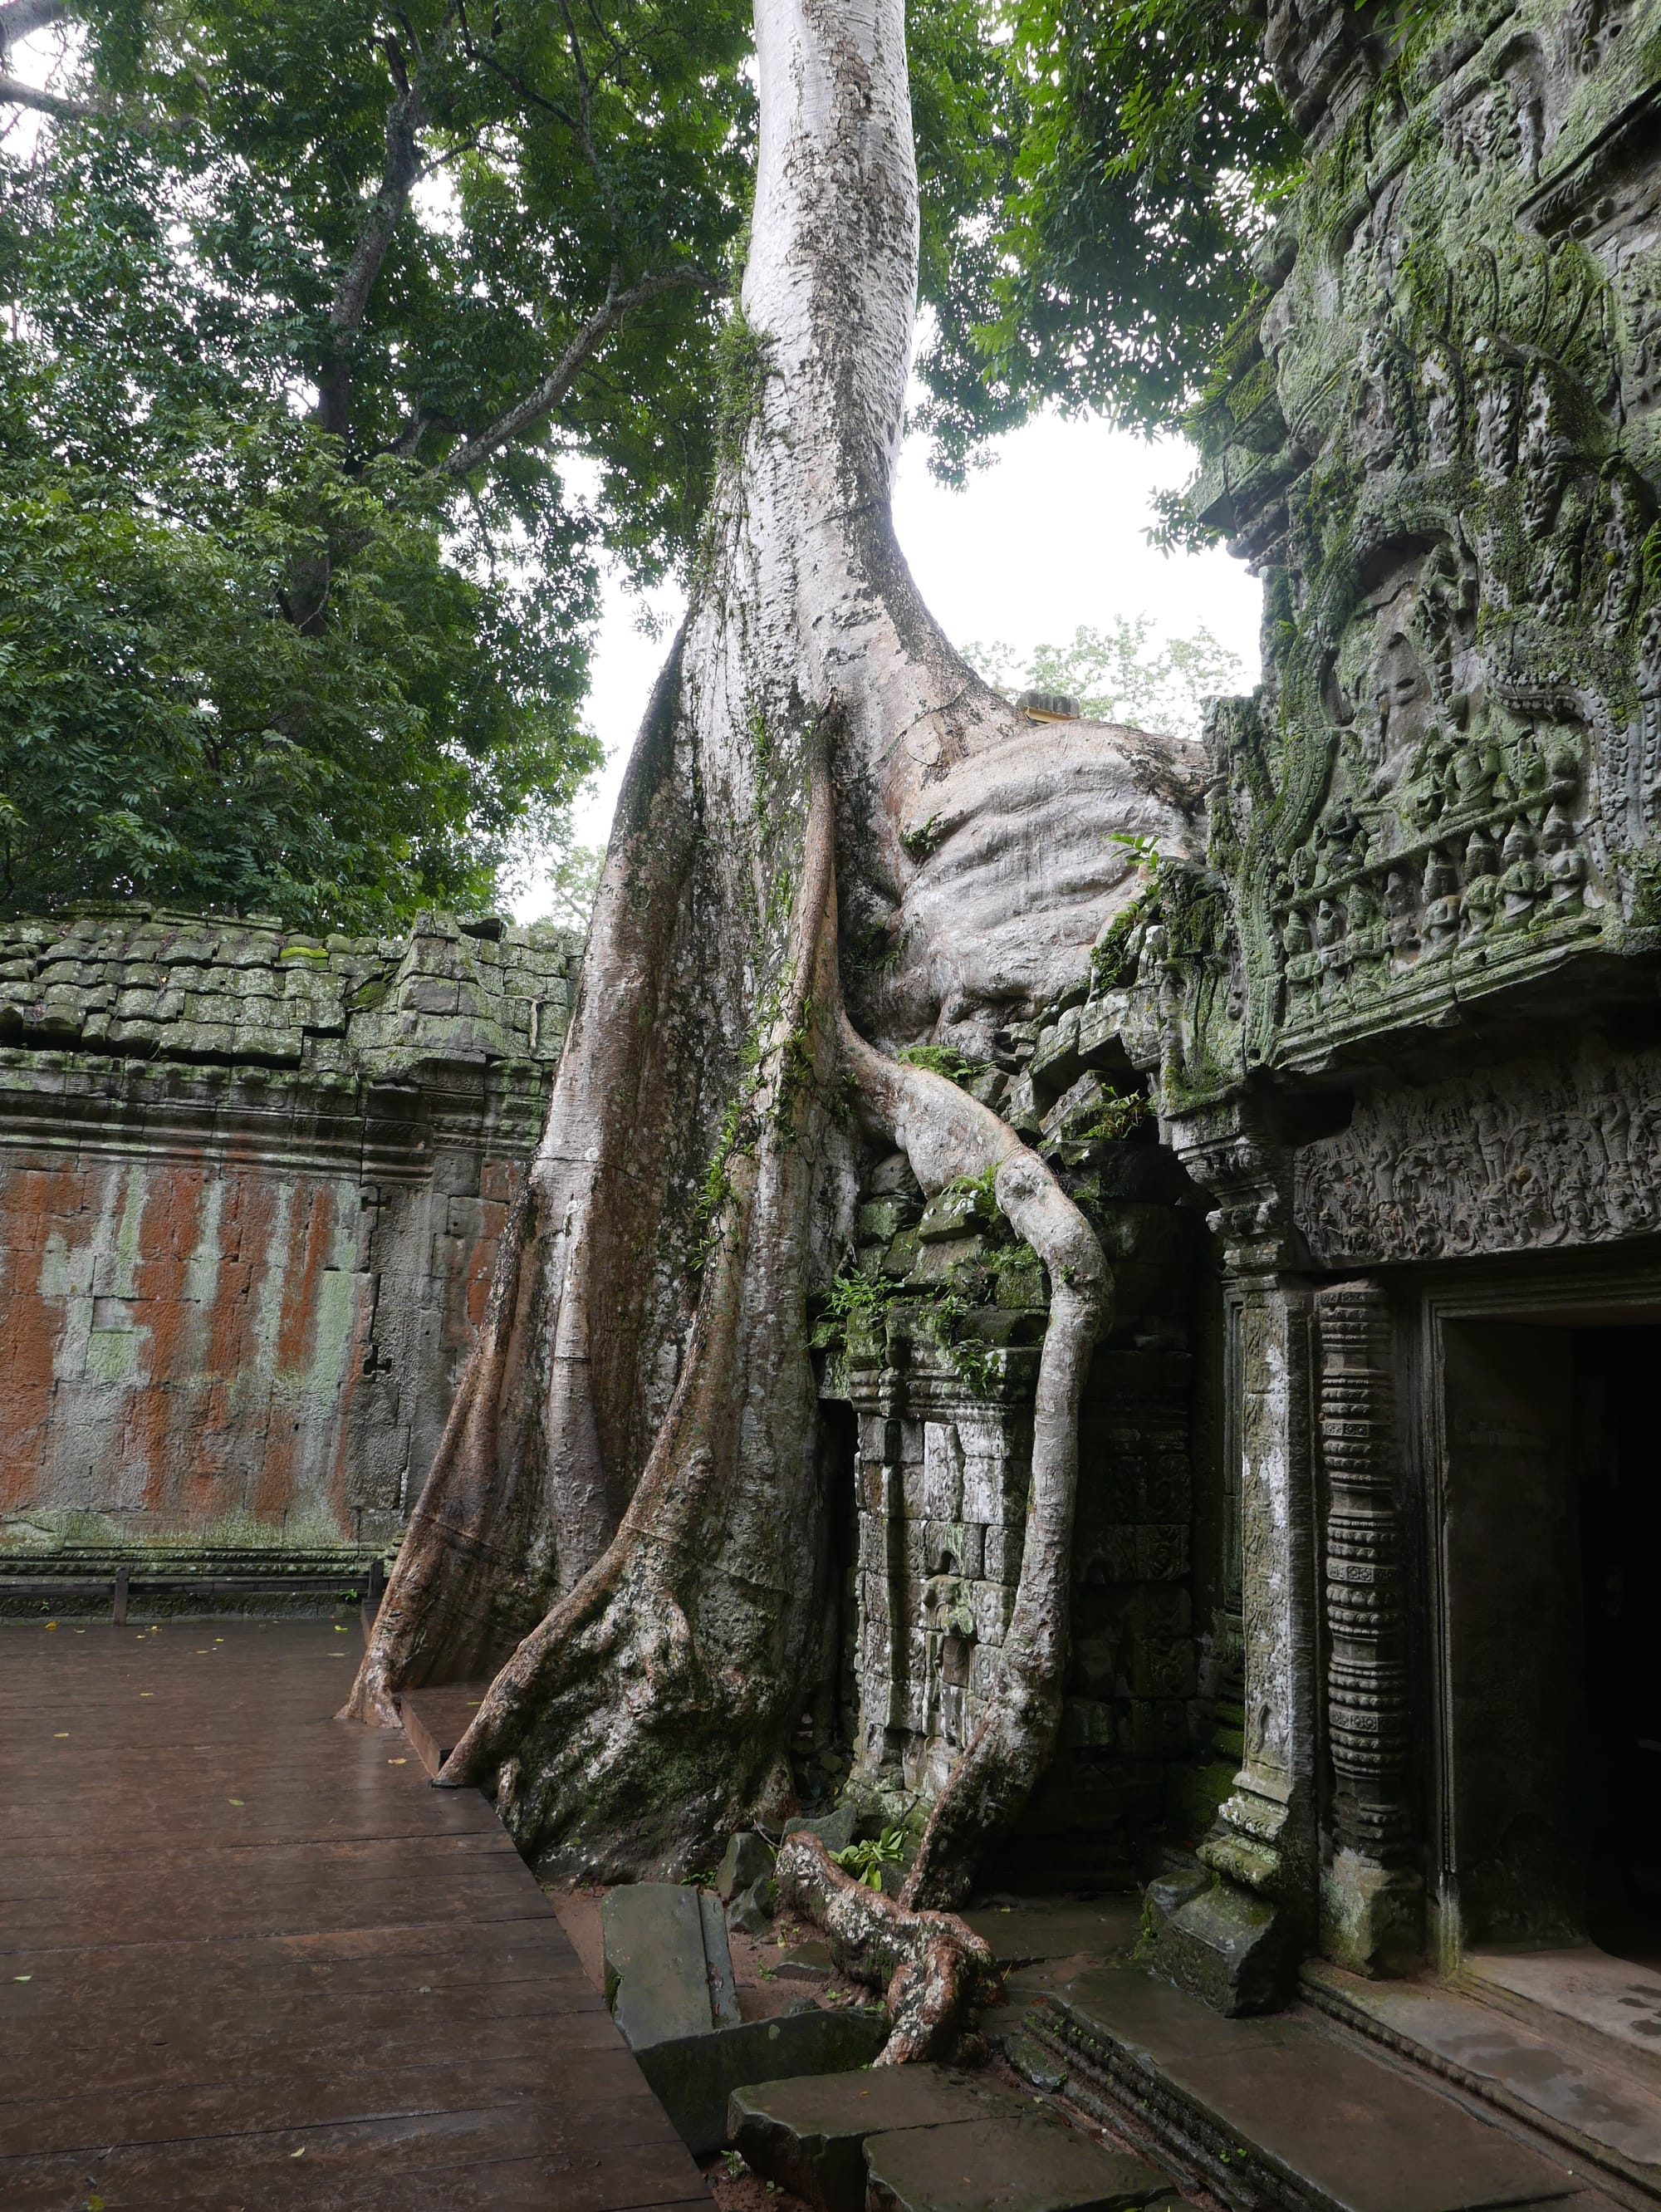 Photo by Author — trees growing over Ta Prohm (ប្រាសាទតាព្រហ្ម), Angkor Archaeological Park, Angkor, Cambodia